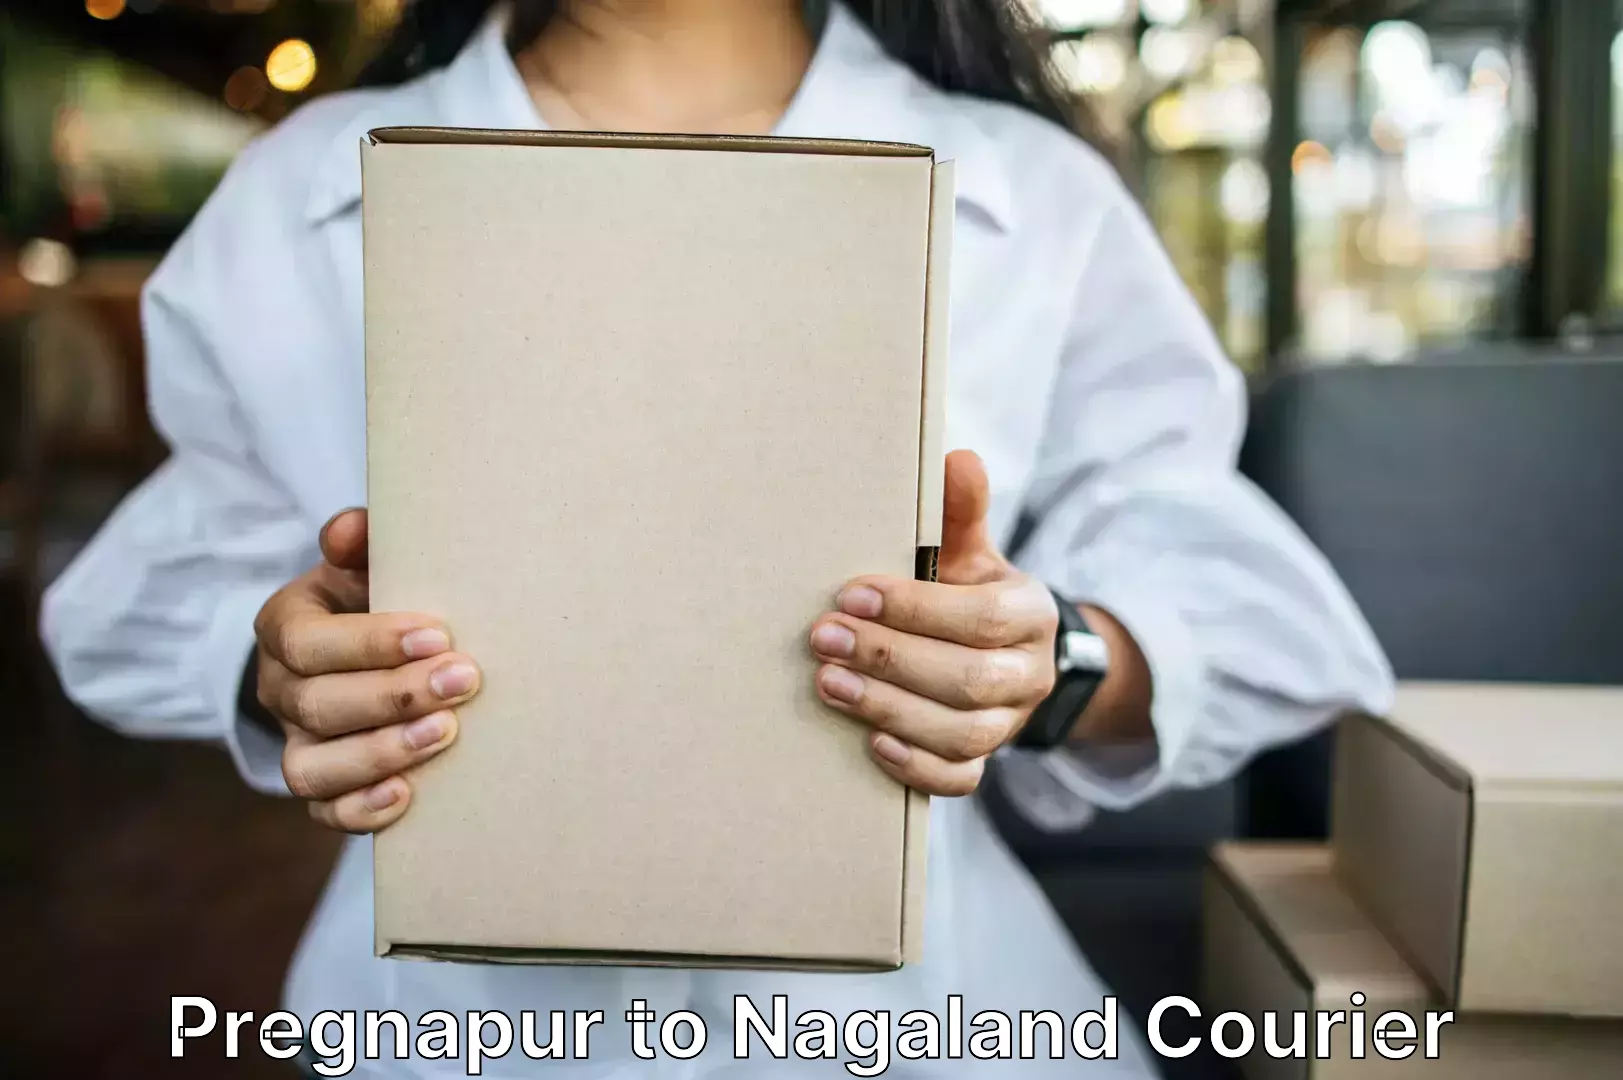 Luggage transport consulting Pregnapur to Nagaland